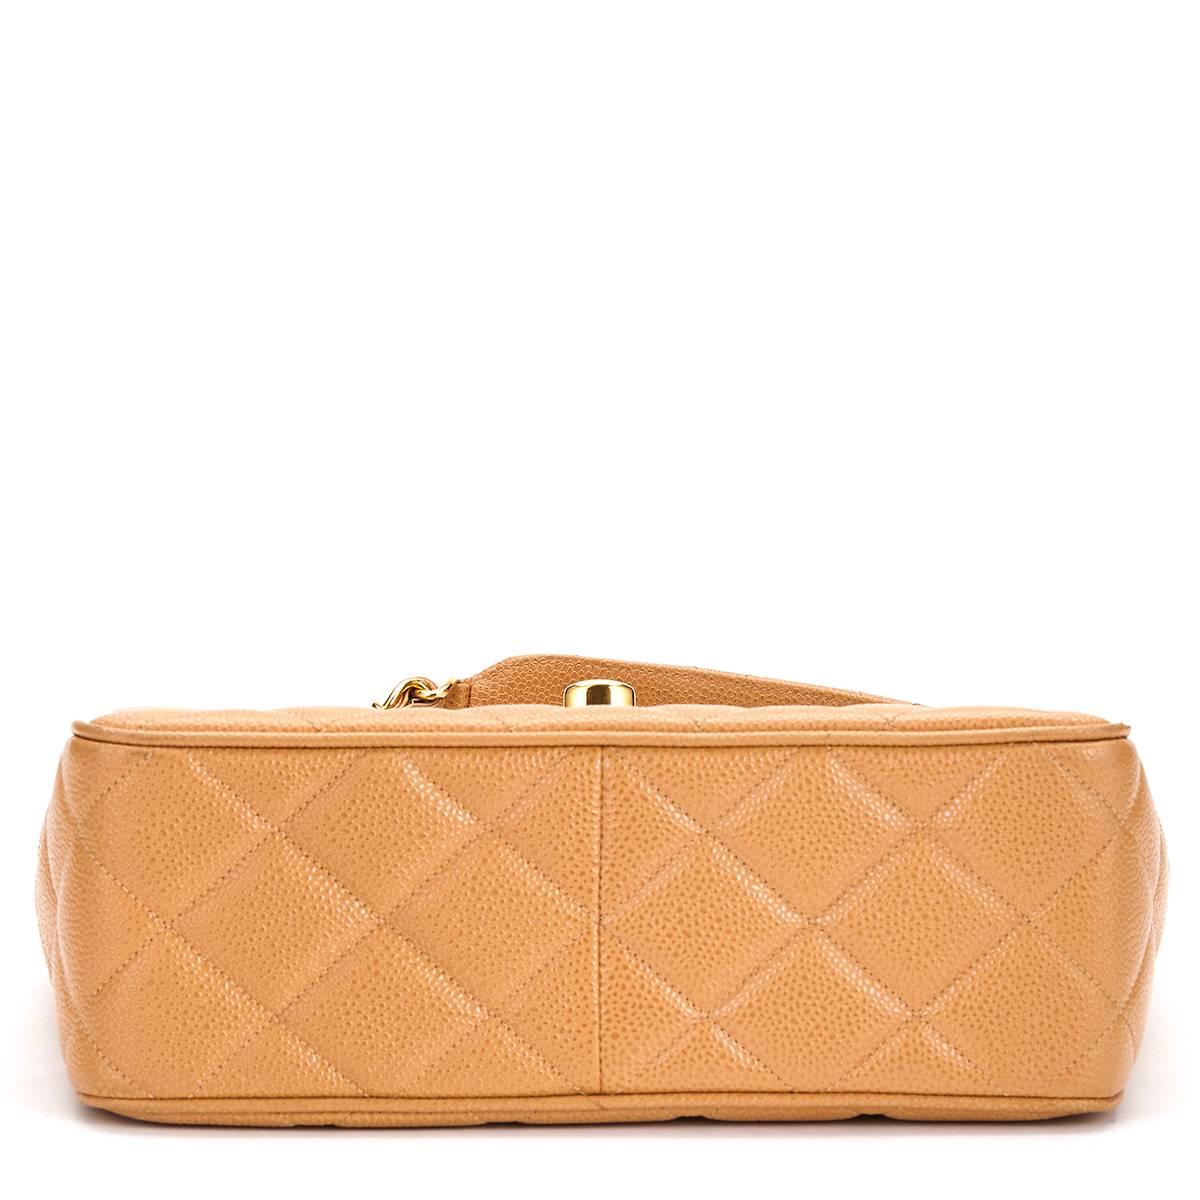 1990s Chanel Mini Tan Quilted Caviar Leather Vintage Single Flap Bag 2